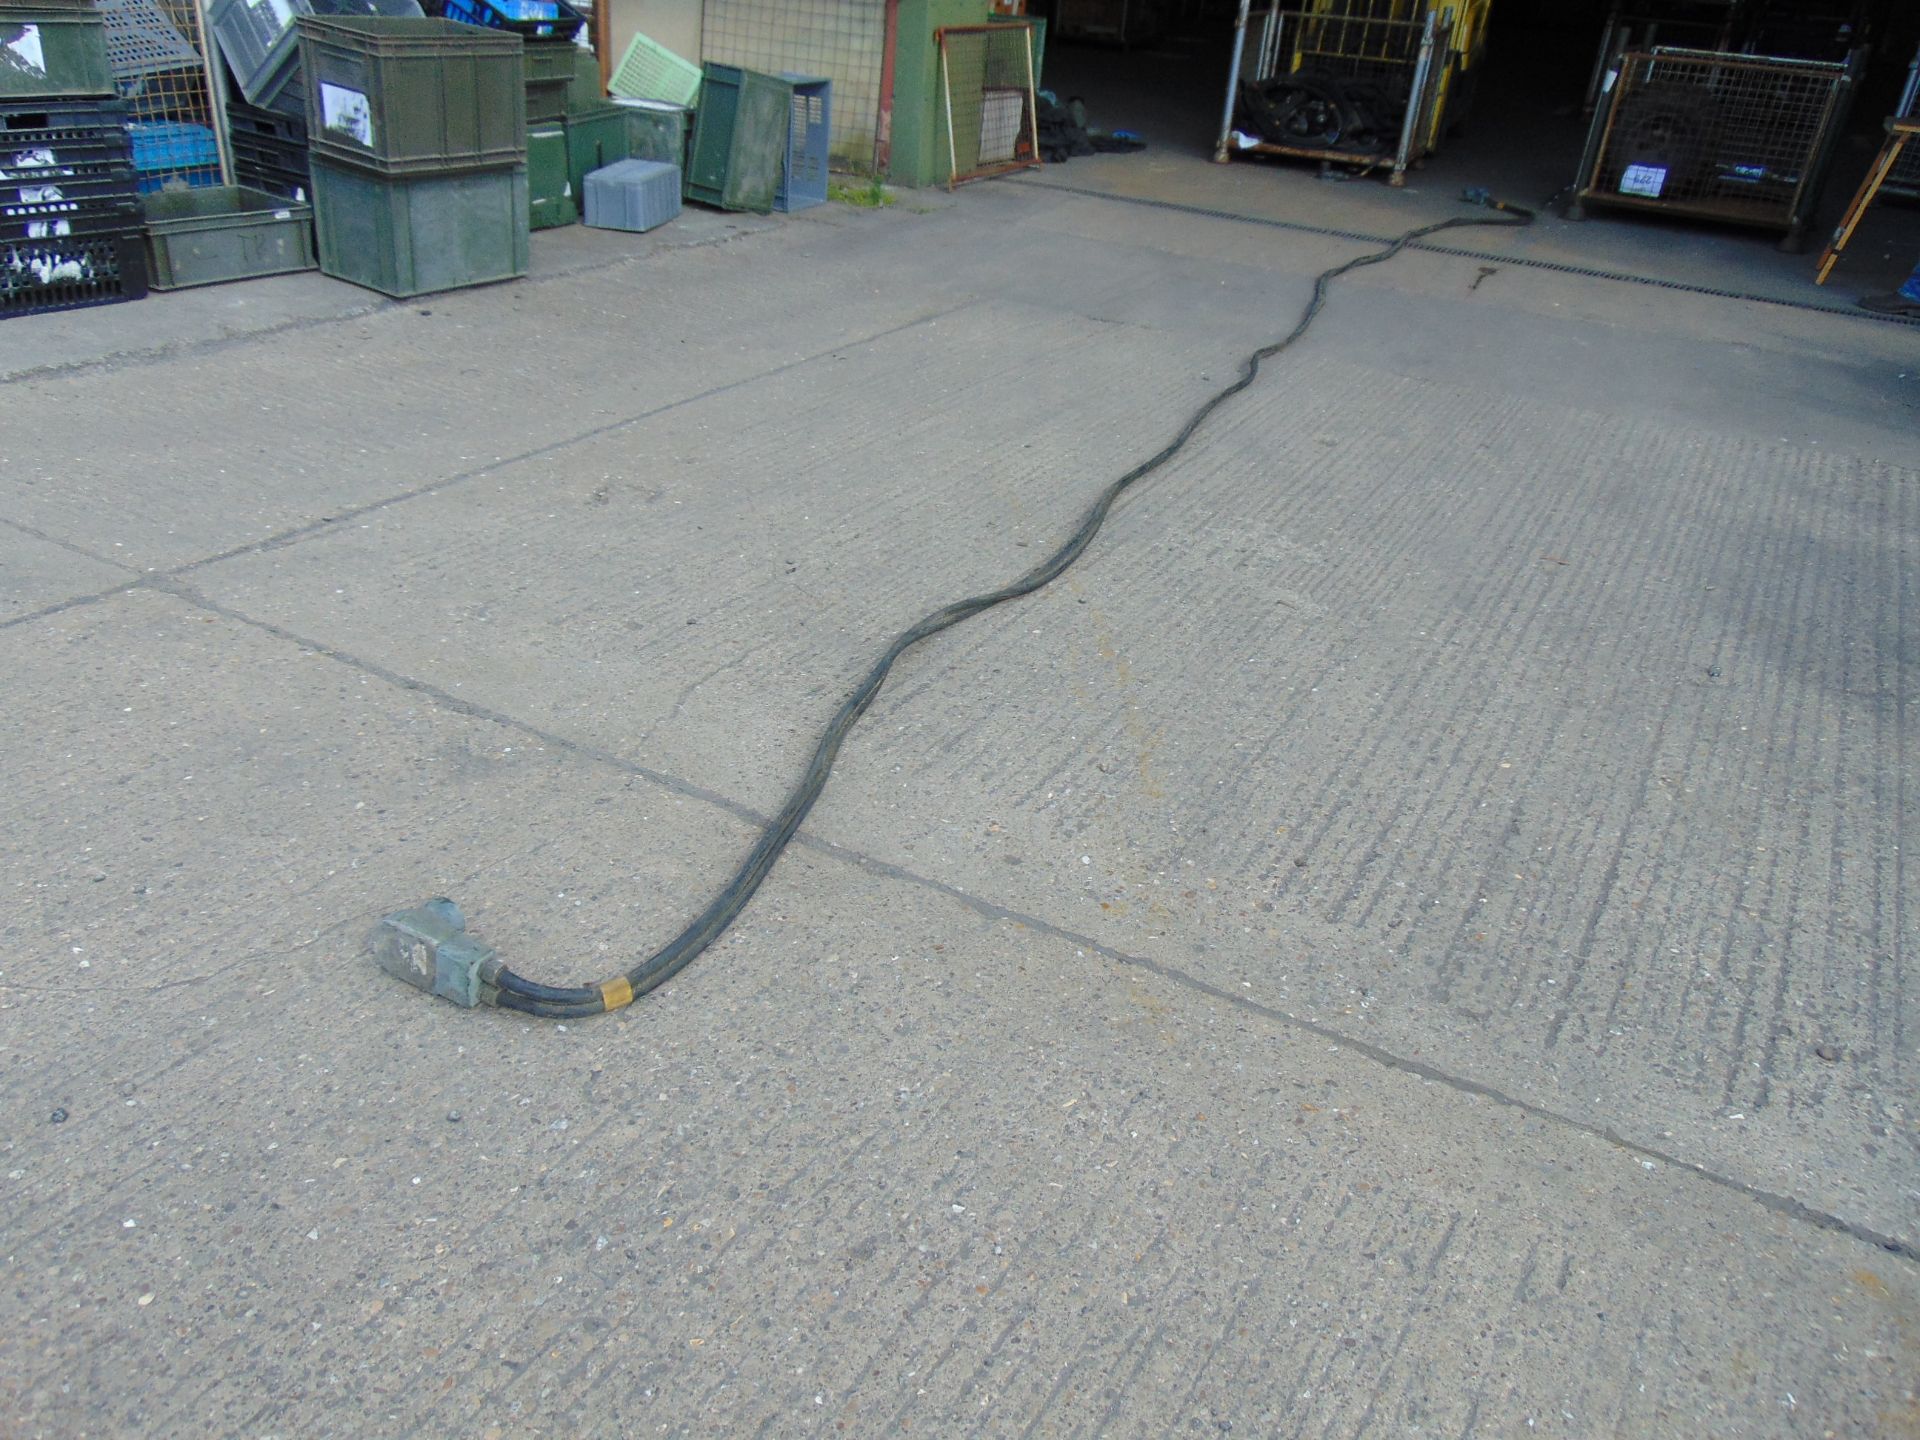 30ft Extra Long Nato Inter Vehicle Jump Start Cable